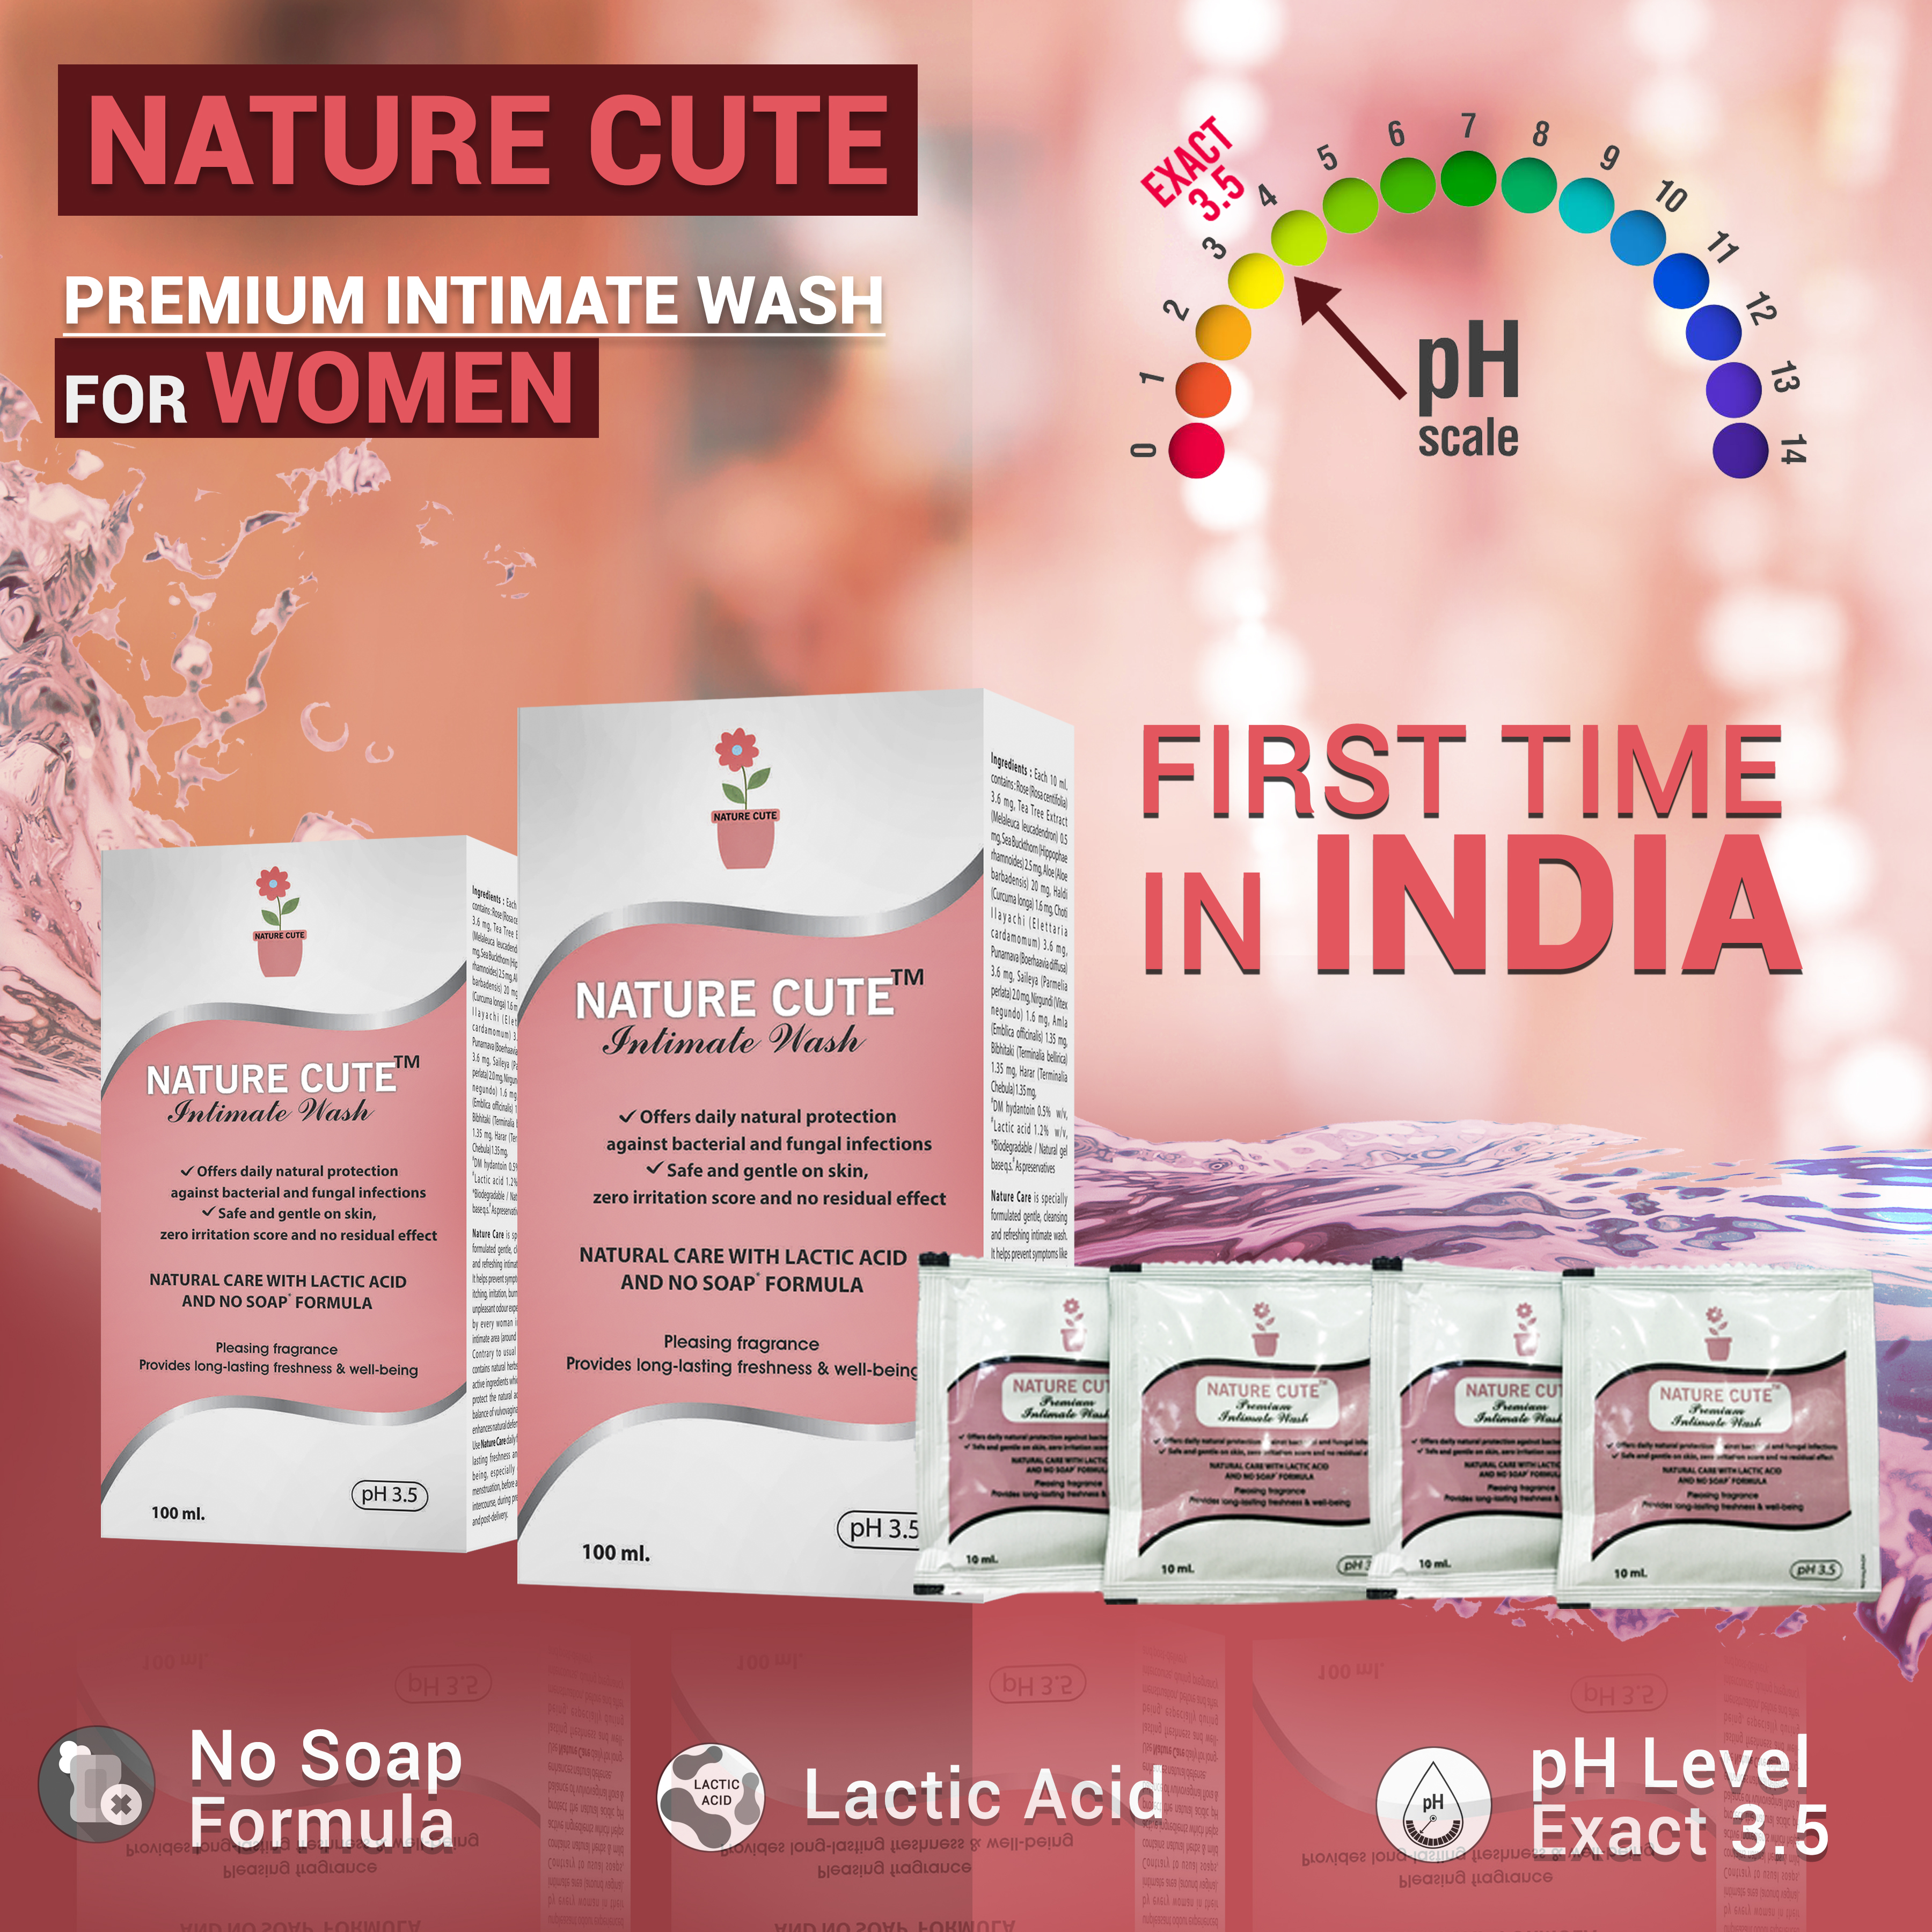 Buy the best Intimate wash for women online